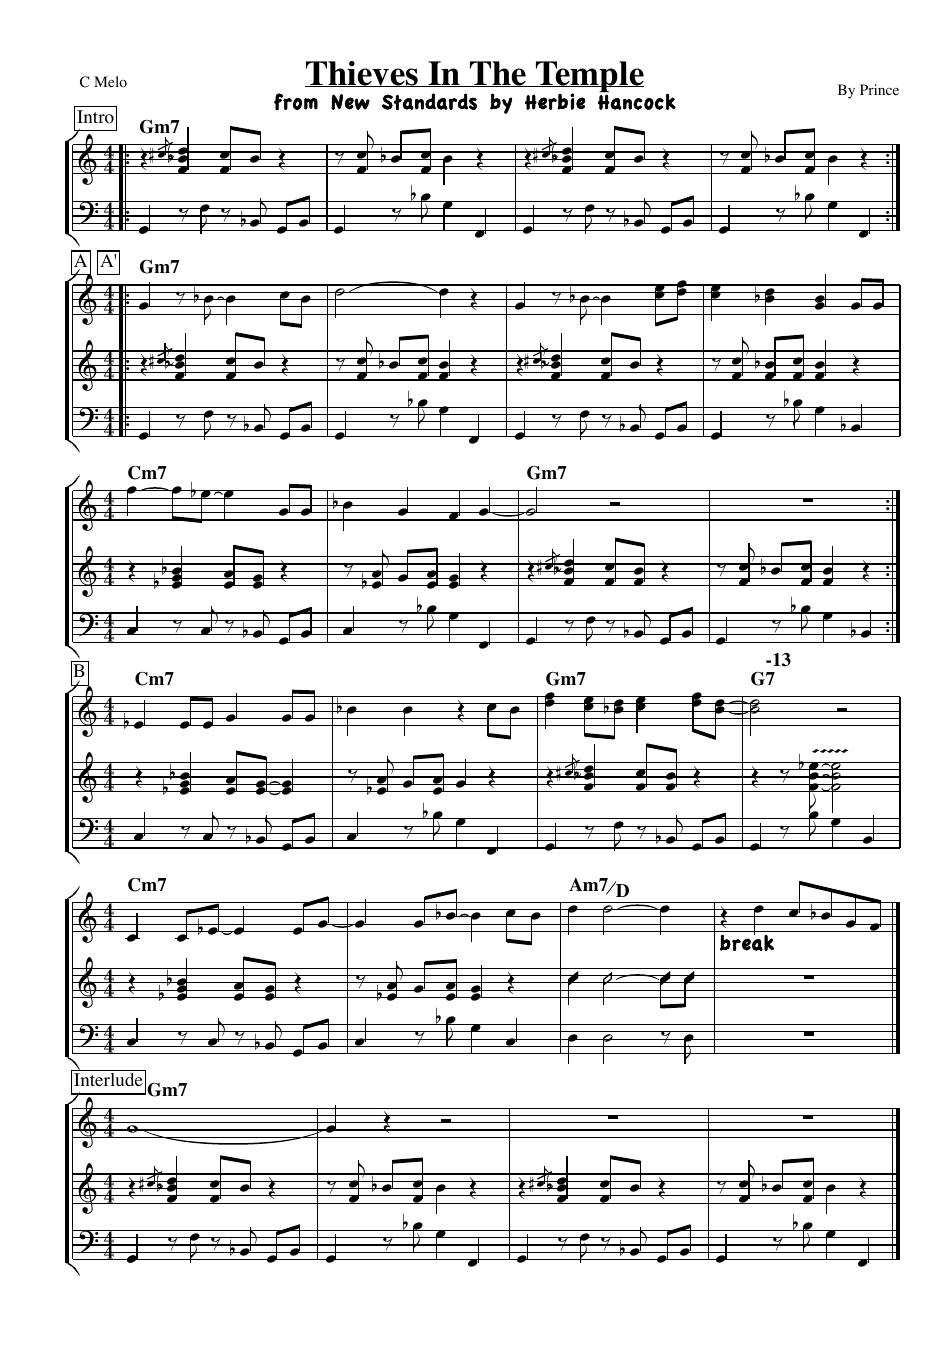 Preview Image for "Thieves in the Temple" C Melody Sheet Music by Prince